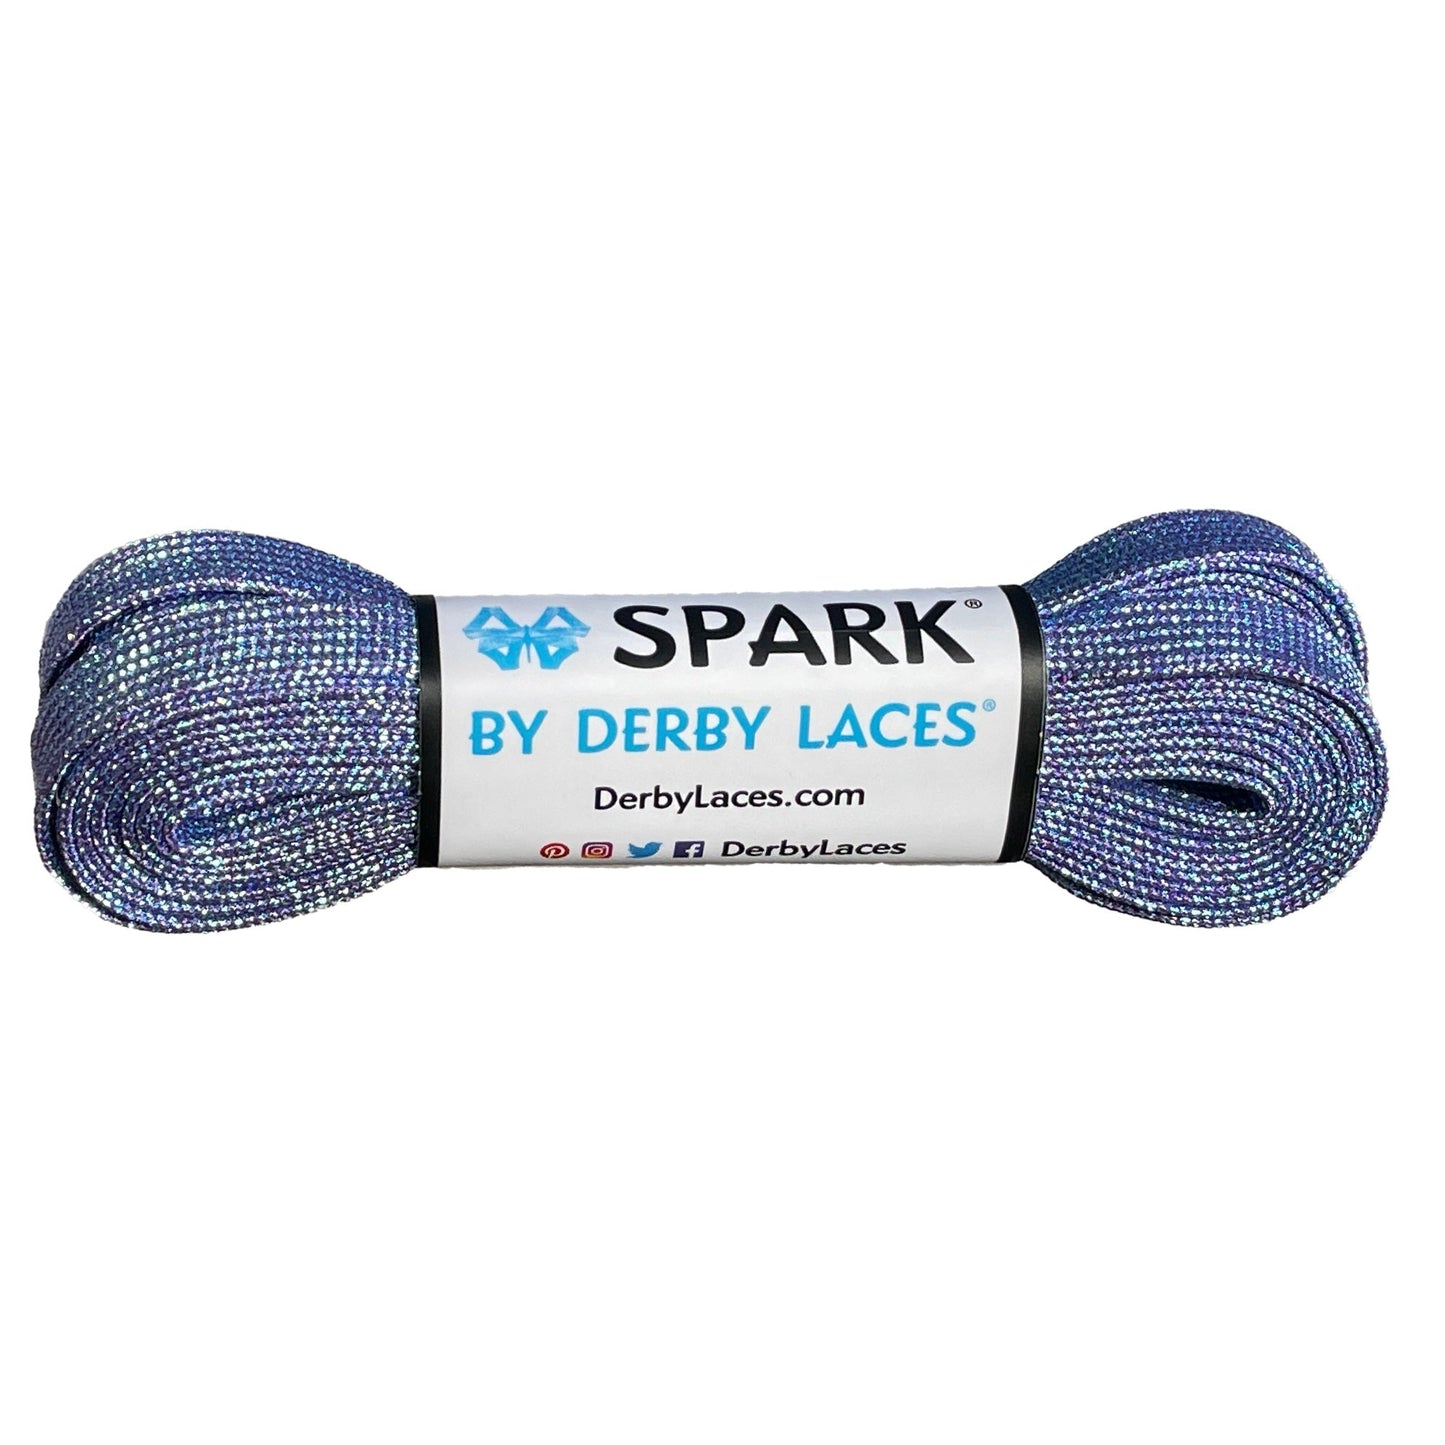 Arctic Blue Mirage 96 inch (244 cm) SPARK by Derby Laces Metallic Roller Derby Skate Lace